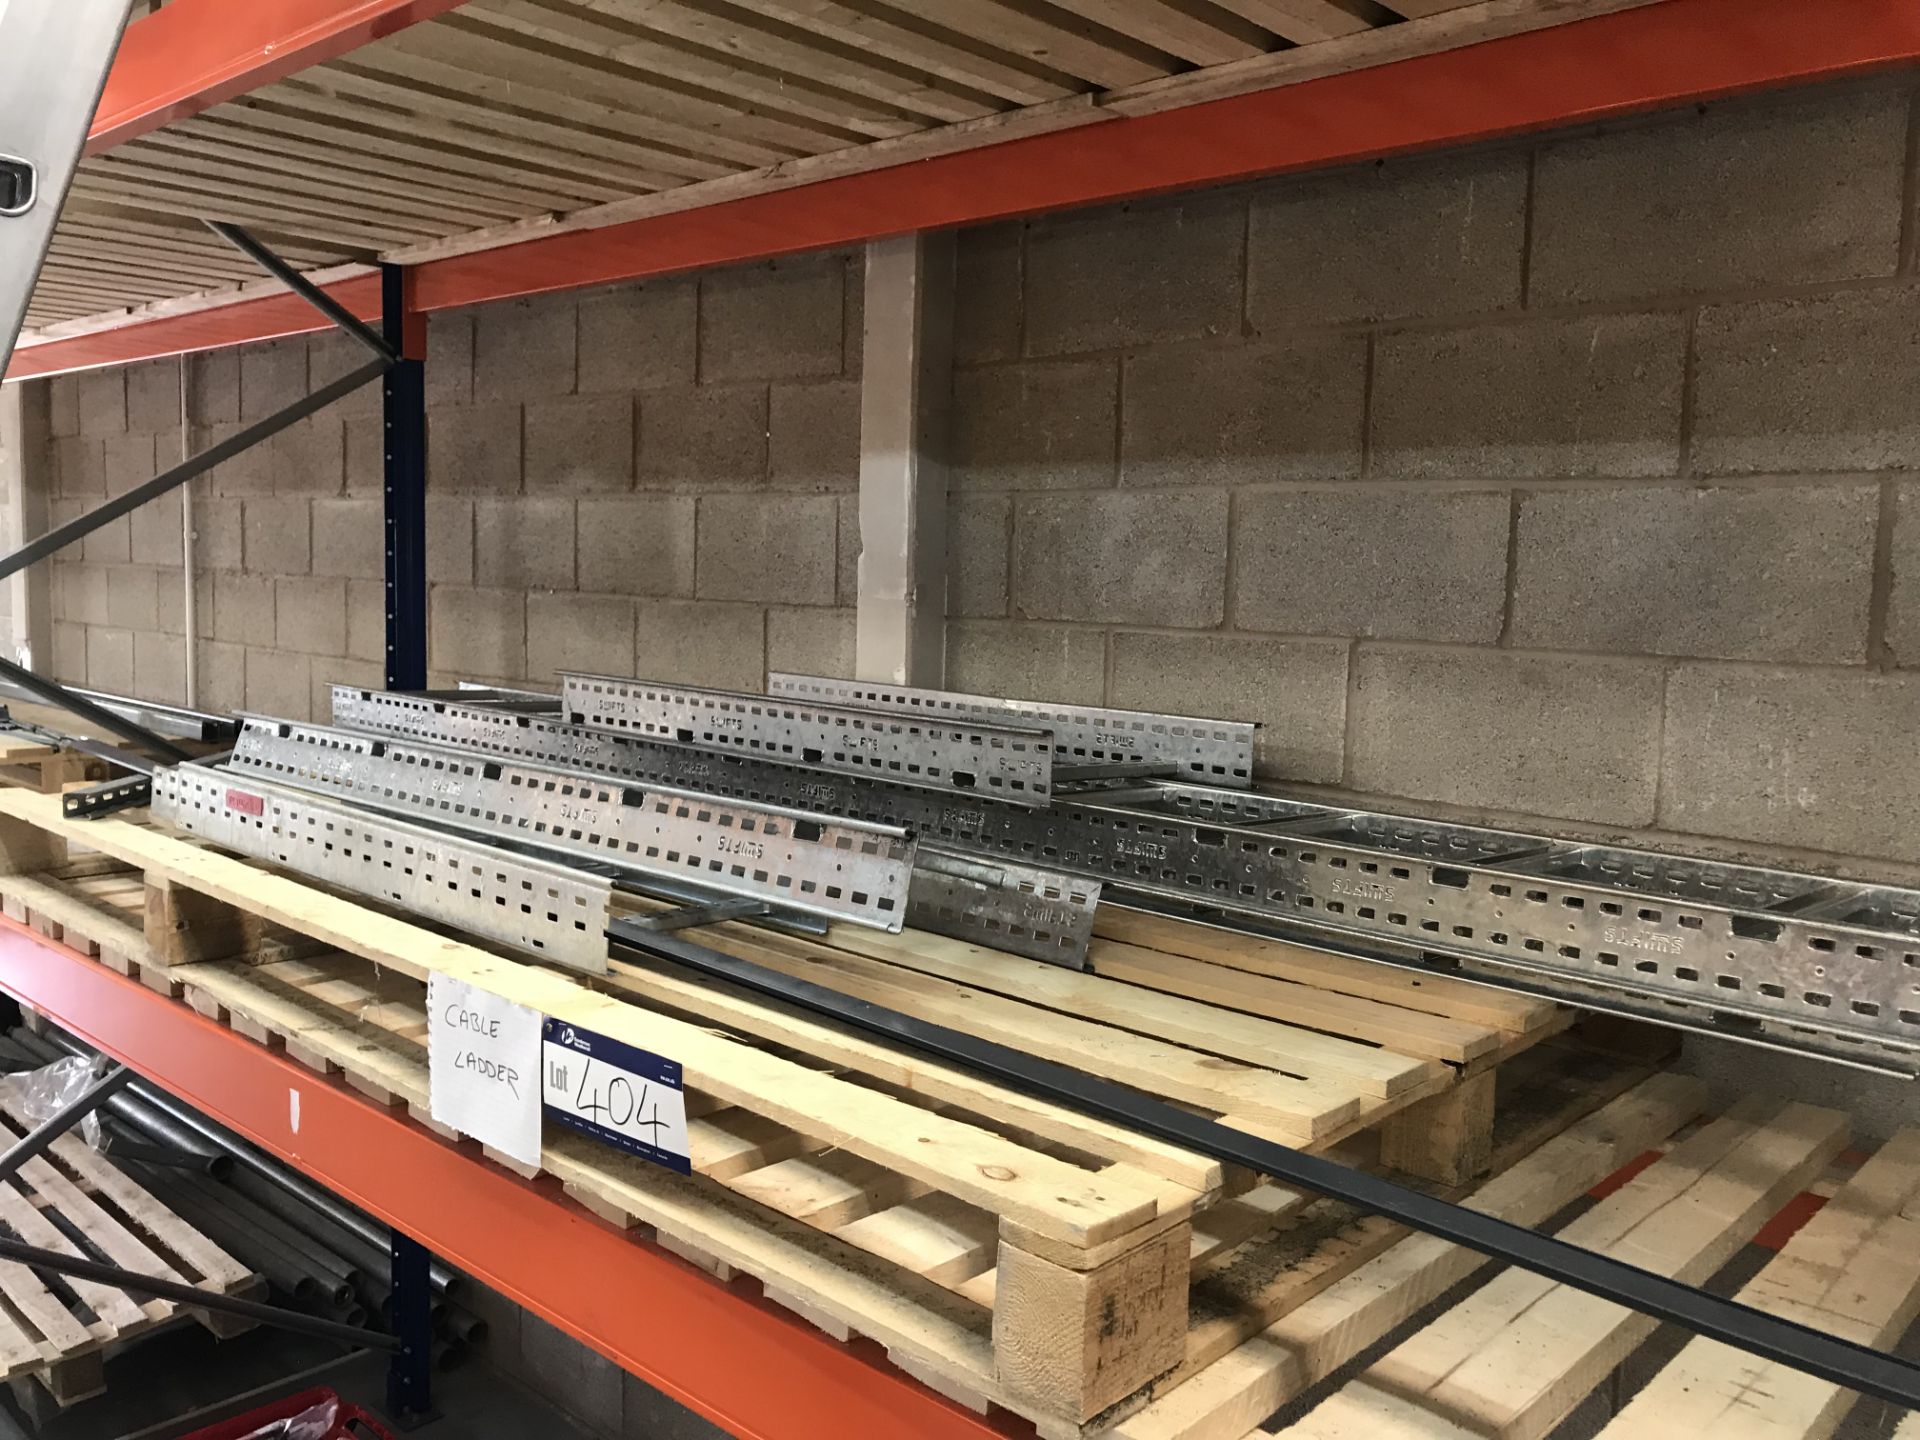 Quantity of Swifts Cable Ladder on Pallet